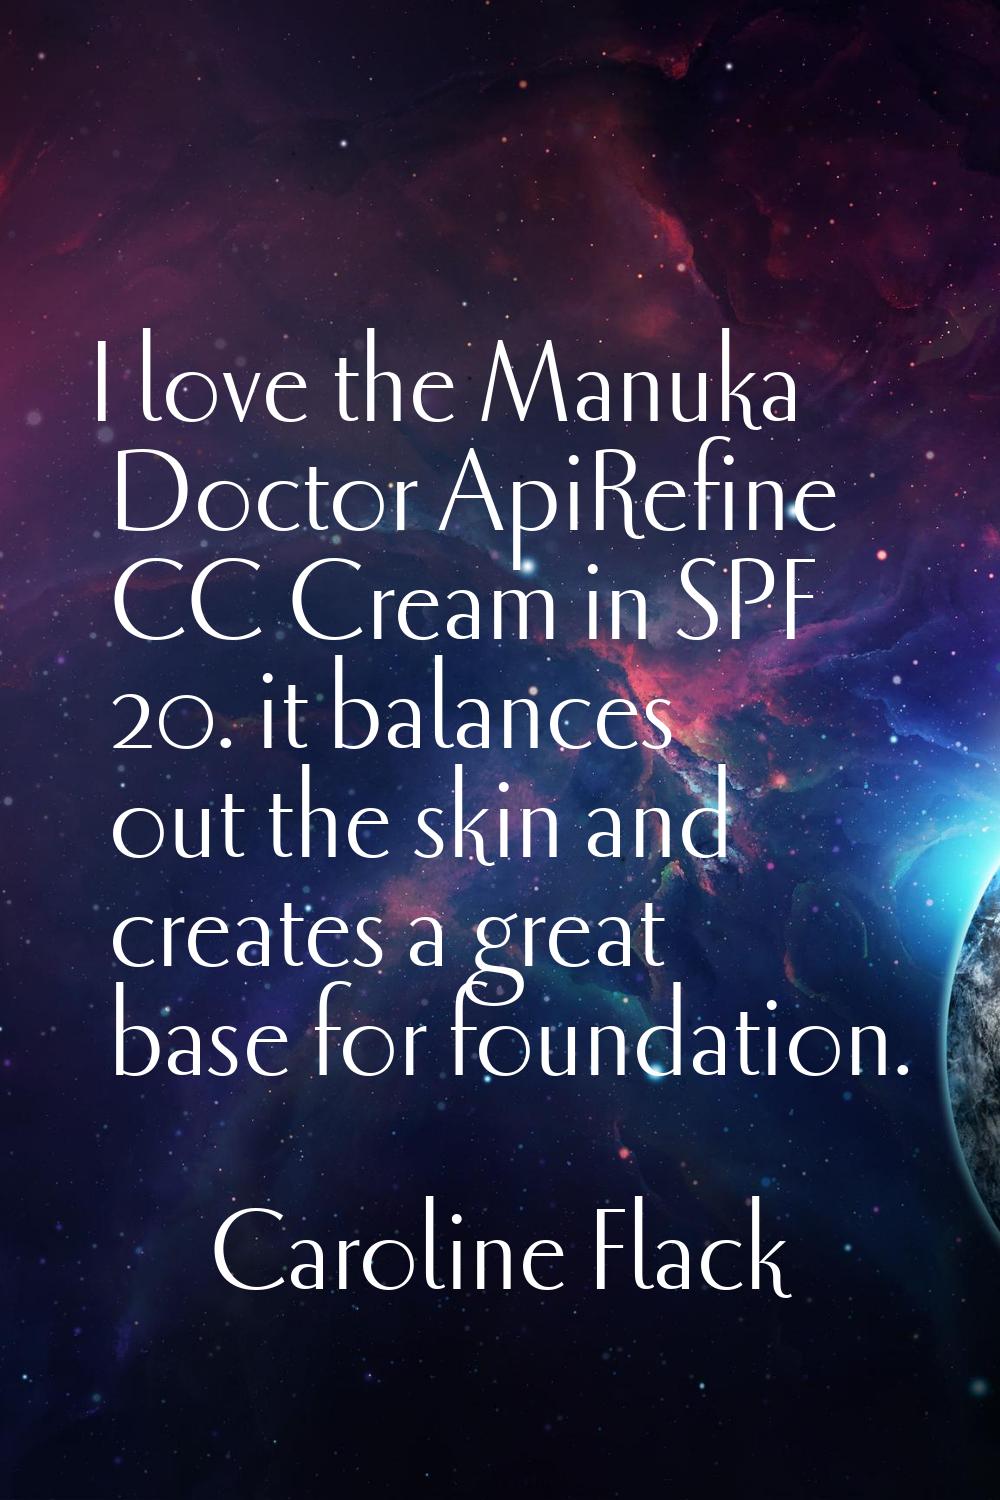 I love the Manuka Doctor ApiRefine CC Cream in SPF 20. it balances out the skin and creates a great